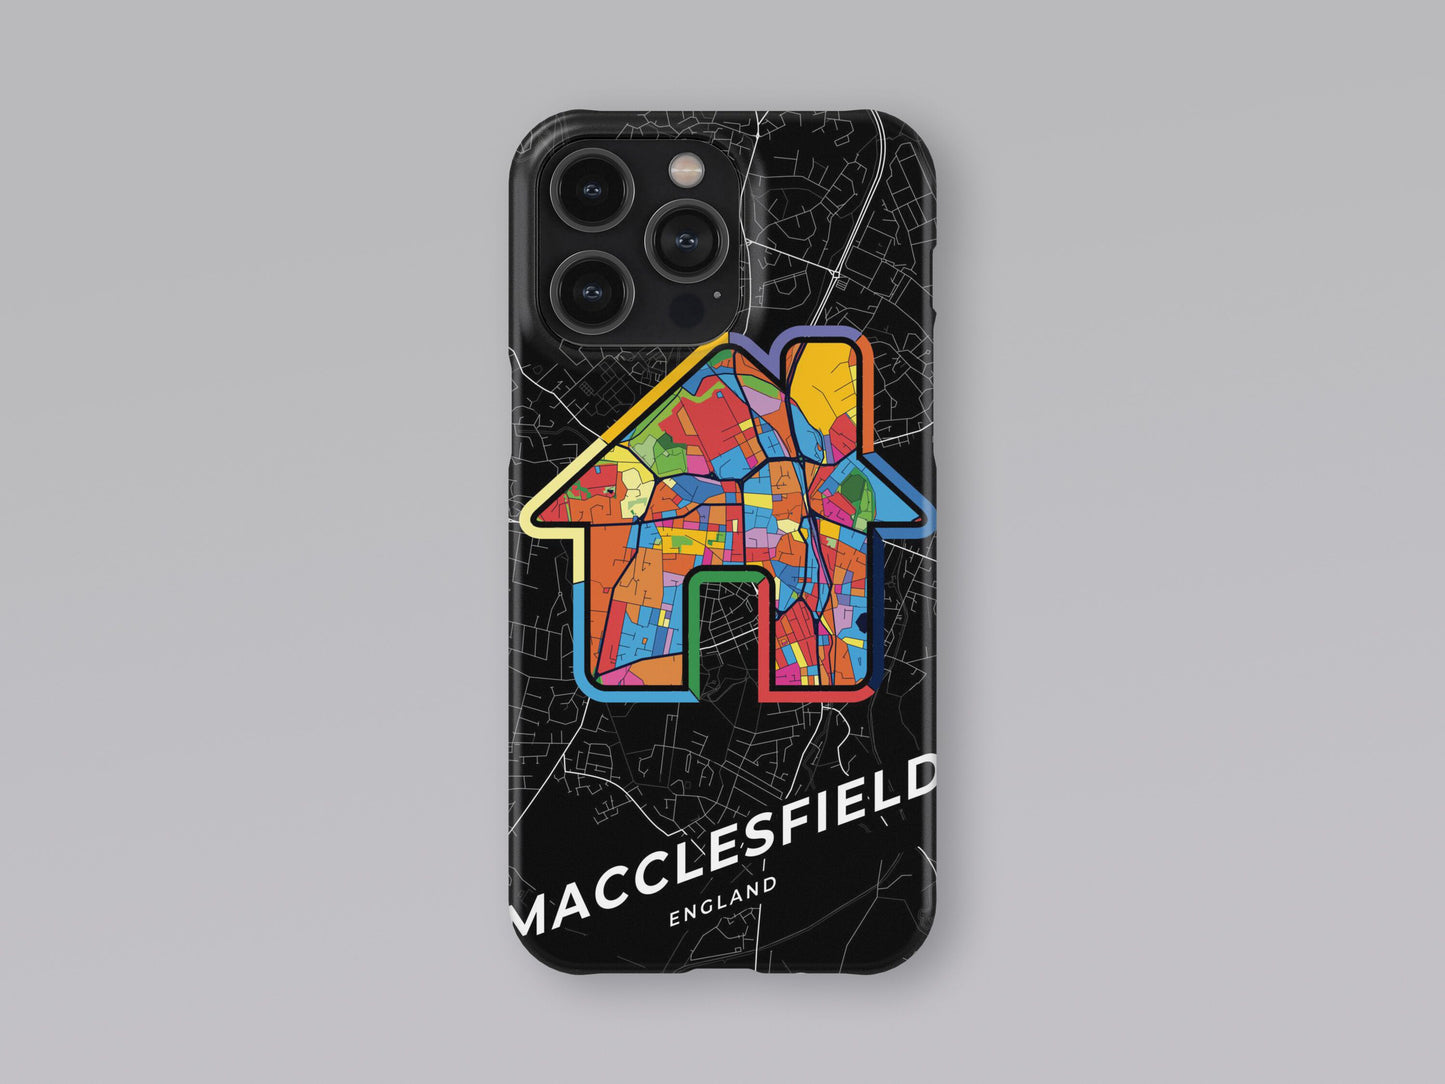 Macclesfield England slim phone case with colorful icon. Birthday, wedding or housewarming gift. Couple match cases. 3